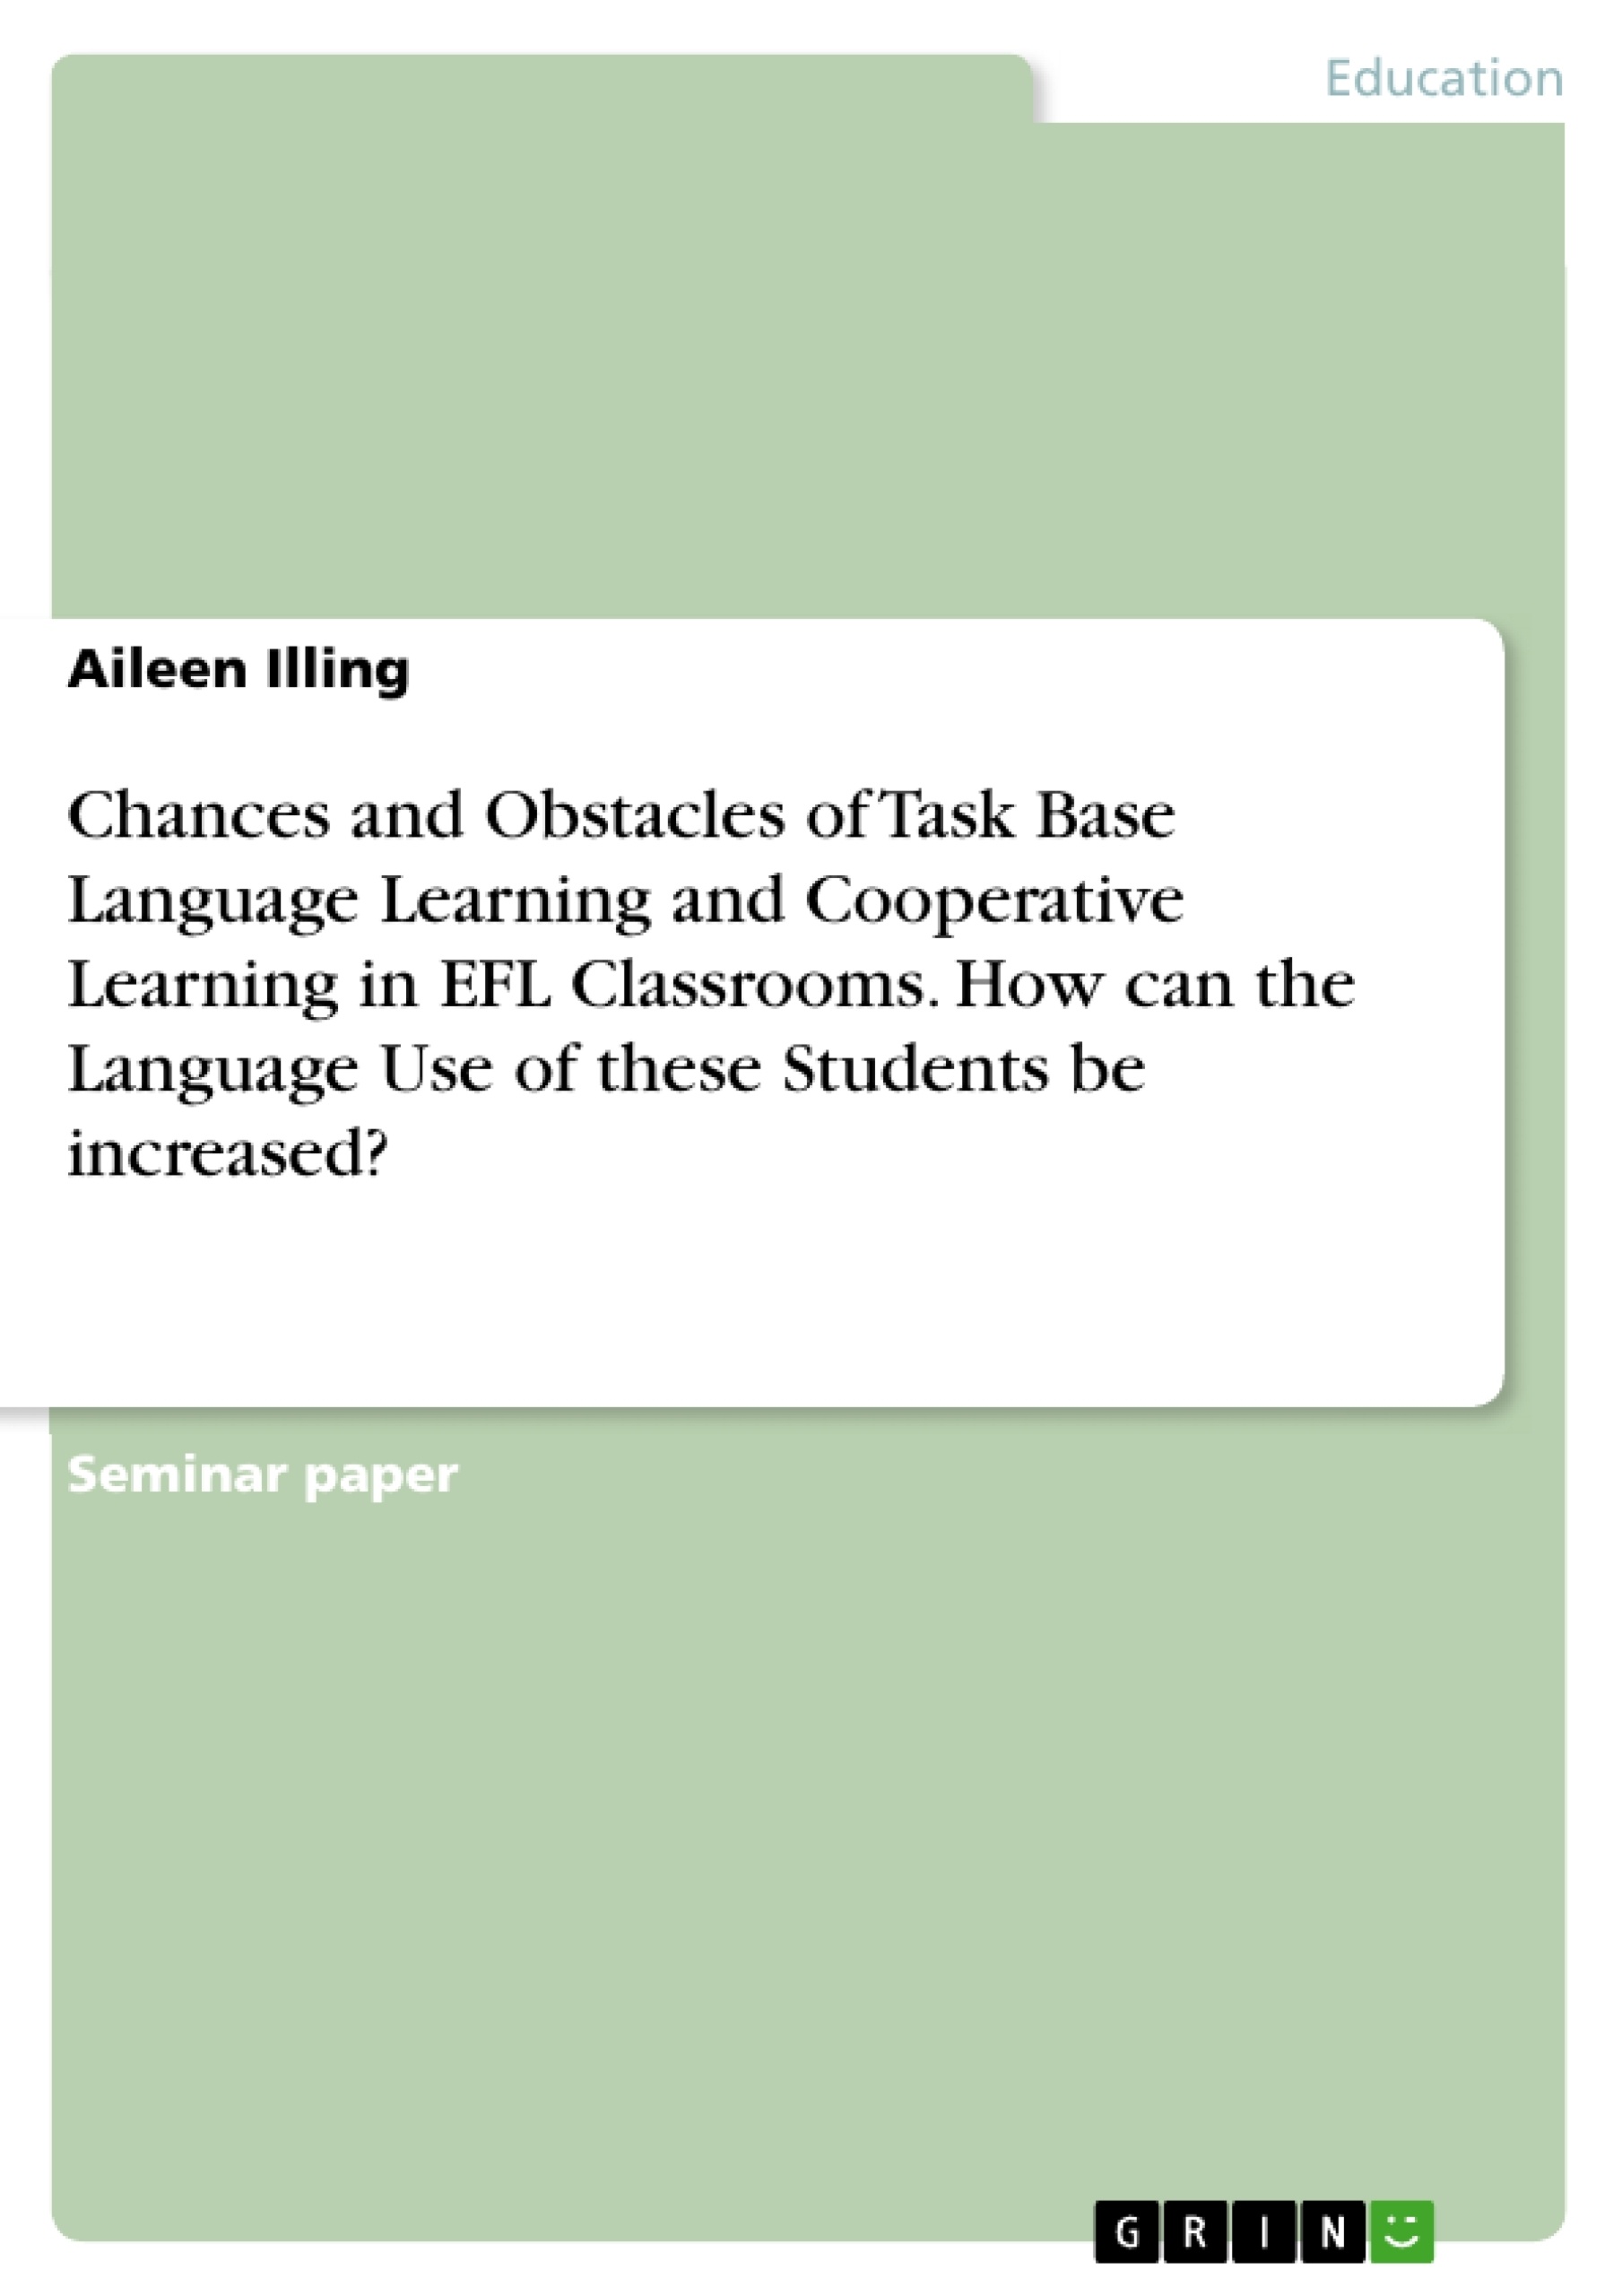 Title: Chances and Obstacles of Task Base Language Learning and Cooperative Learning in EFL Classrooms. How can the Language Use of these Students be increased?